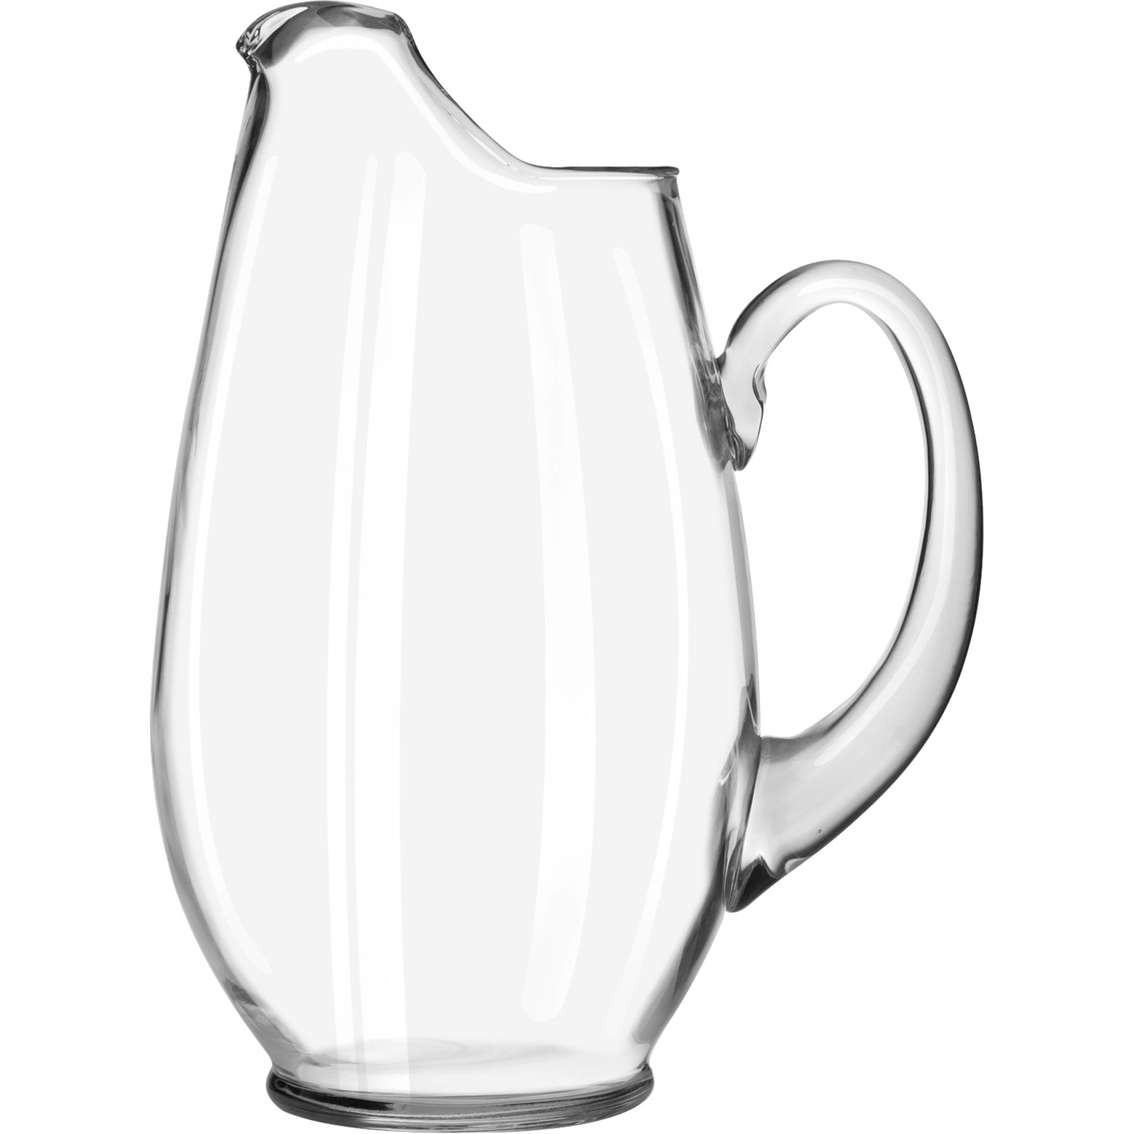 Libbey Glass Mario Pitcher - Image 2 of 2